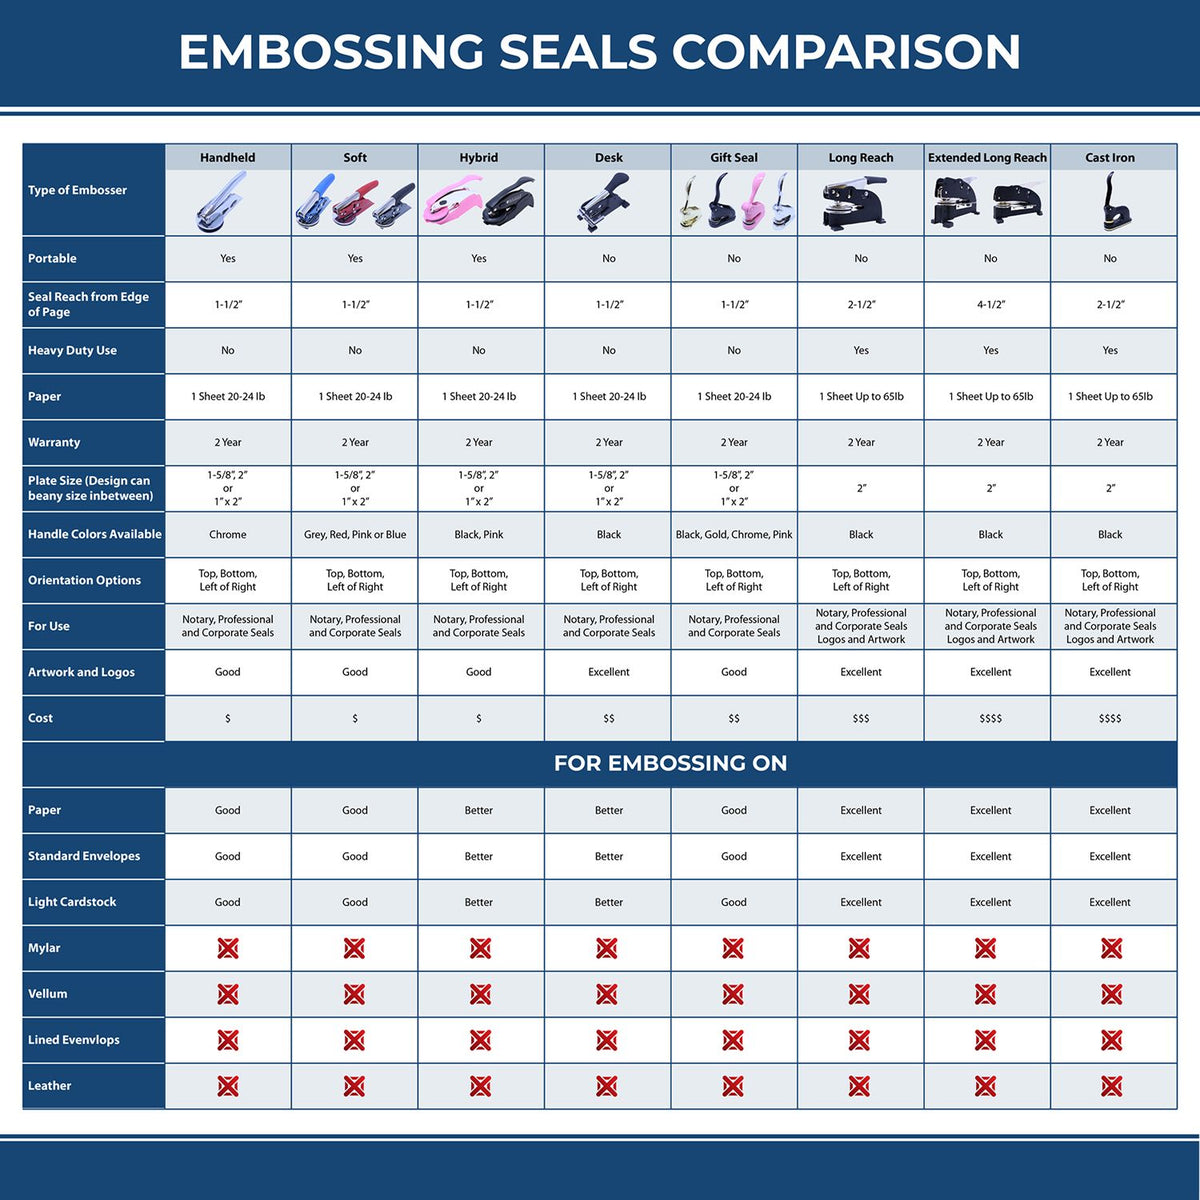 A comparison chart for the different types of mount models available for the Soft West Virginia Professional Geologist Seal